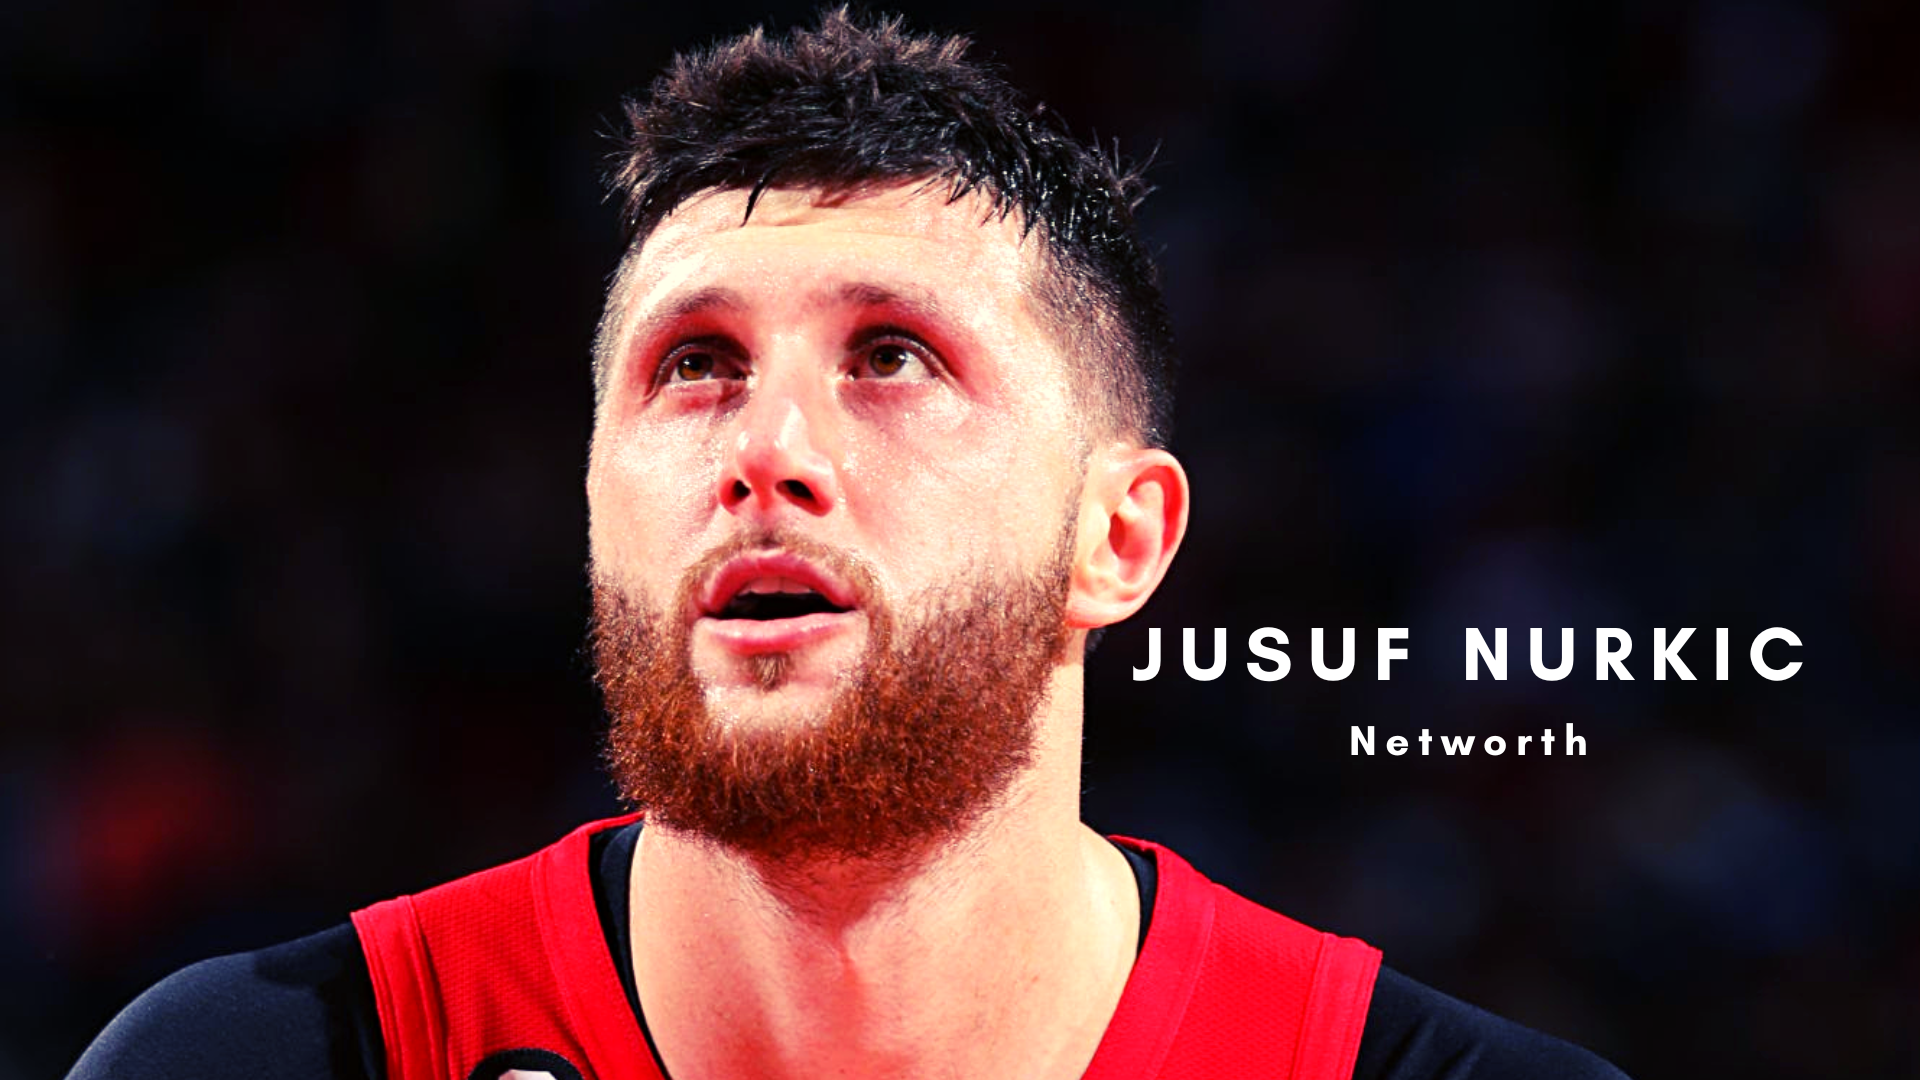 Jusuf Nurkic 2022 Net Worth, Salary, Records and Endorsements